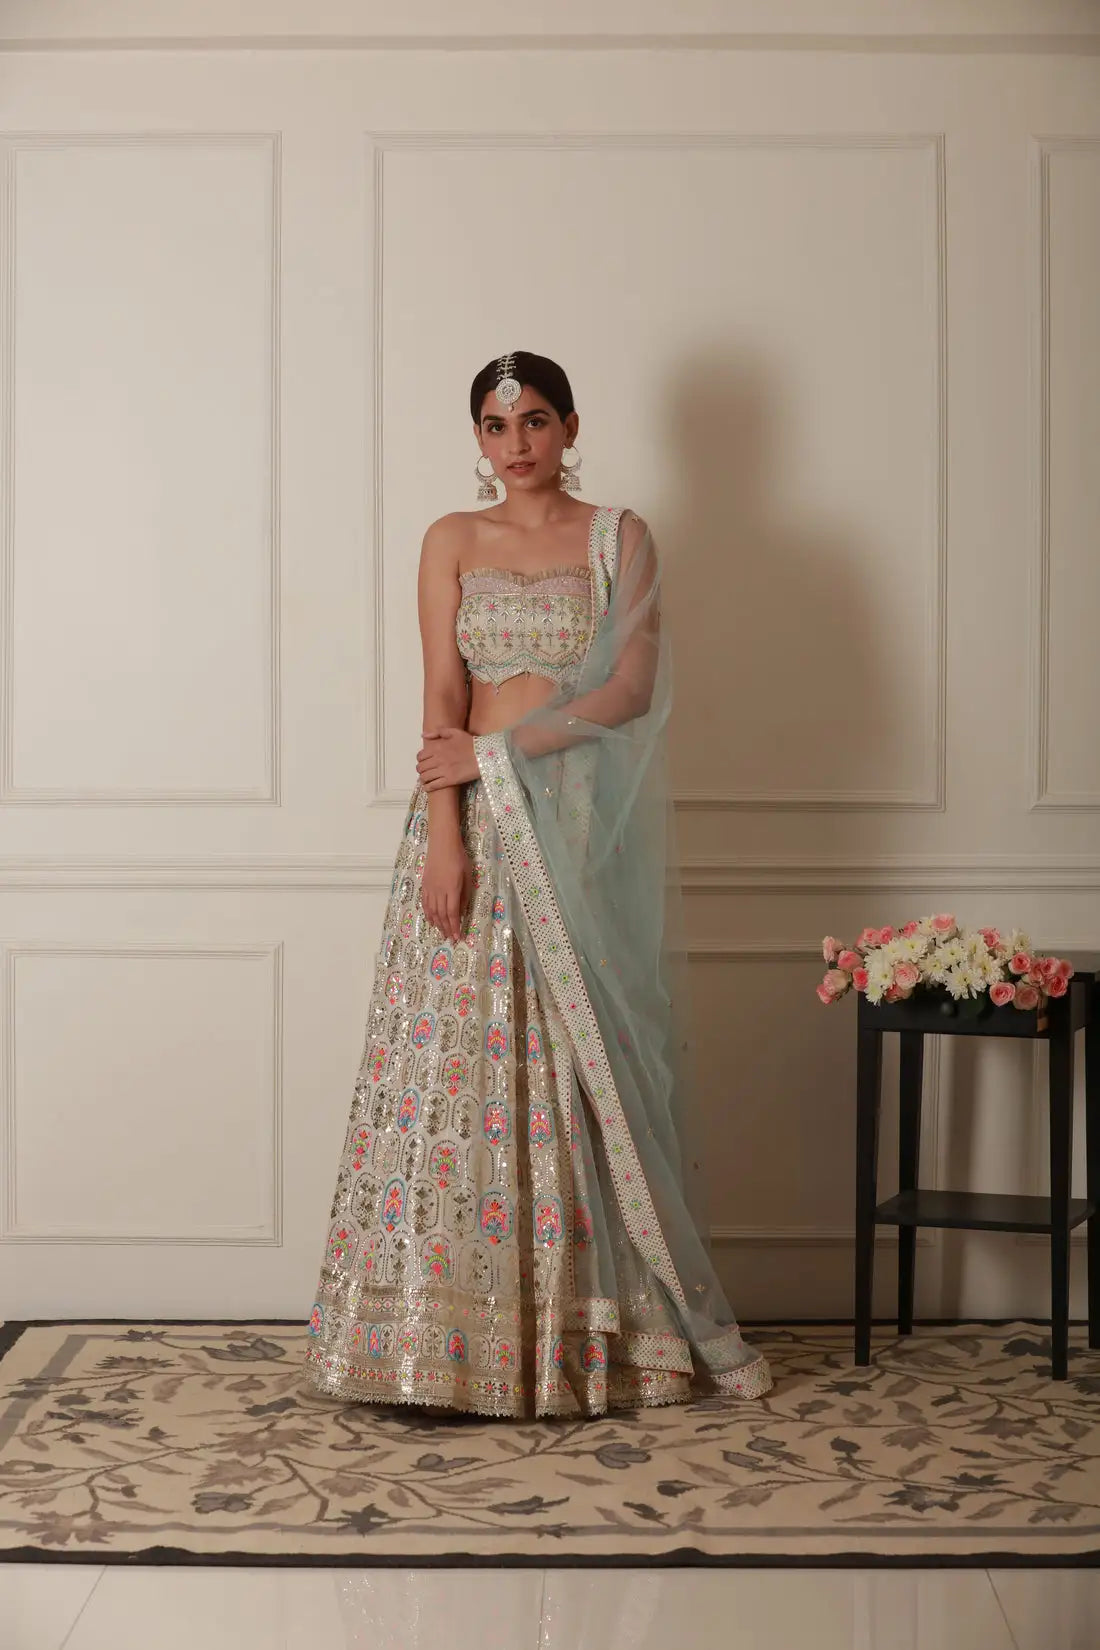 Trendy and unique choli designs to go with your dream lehenga this wedding  season | Times of India